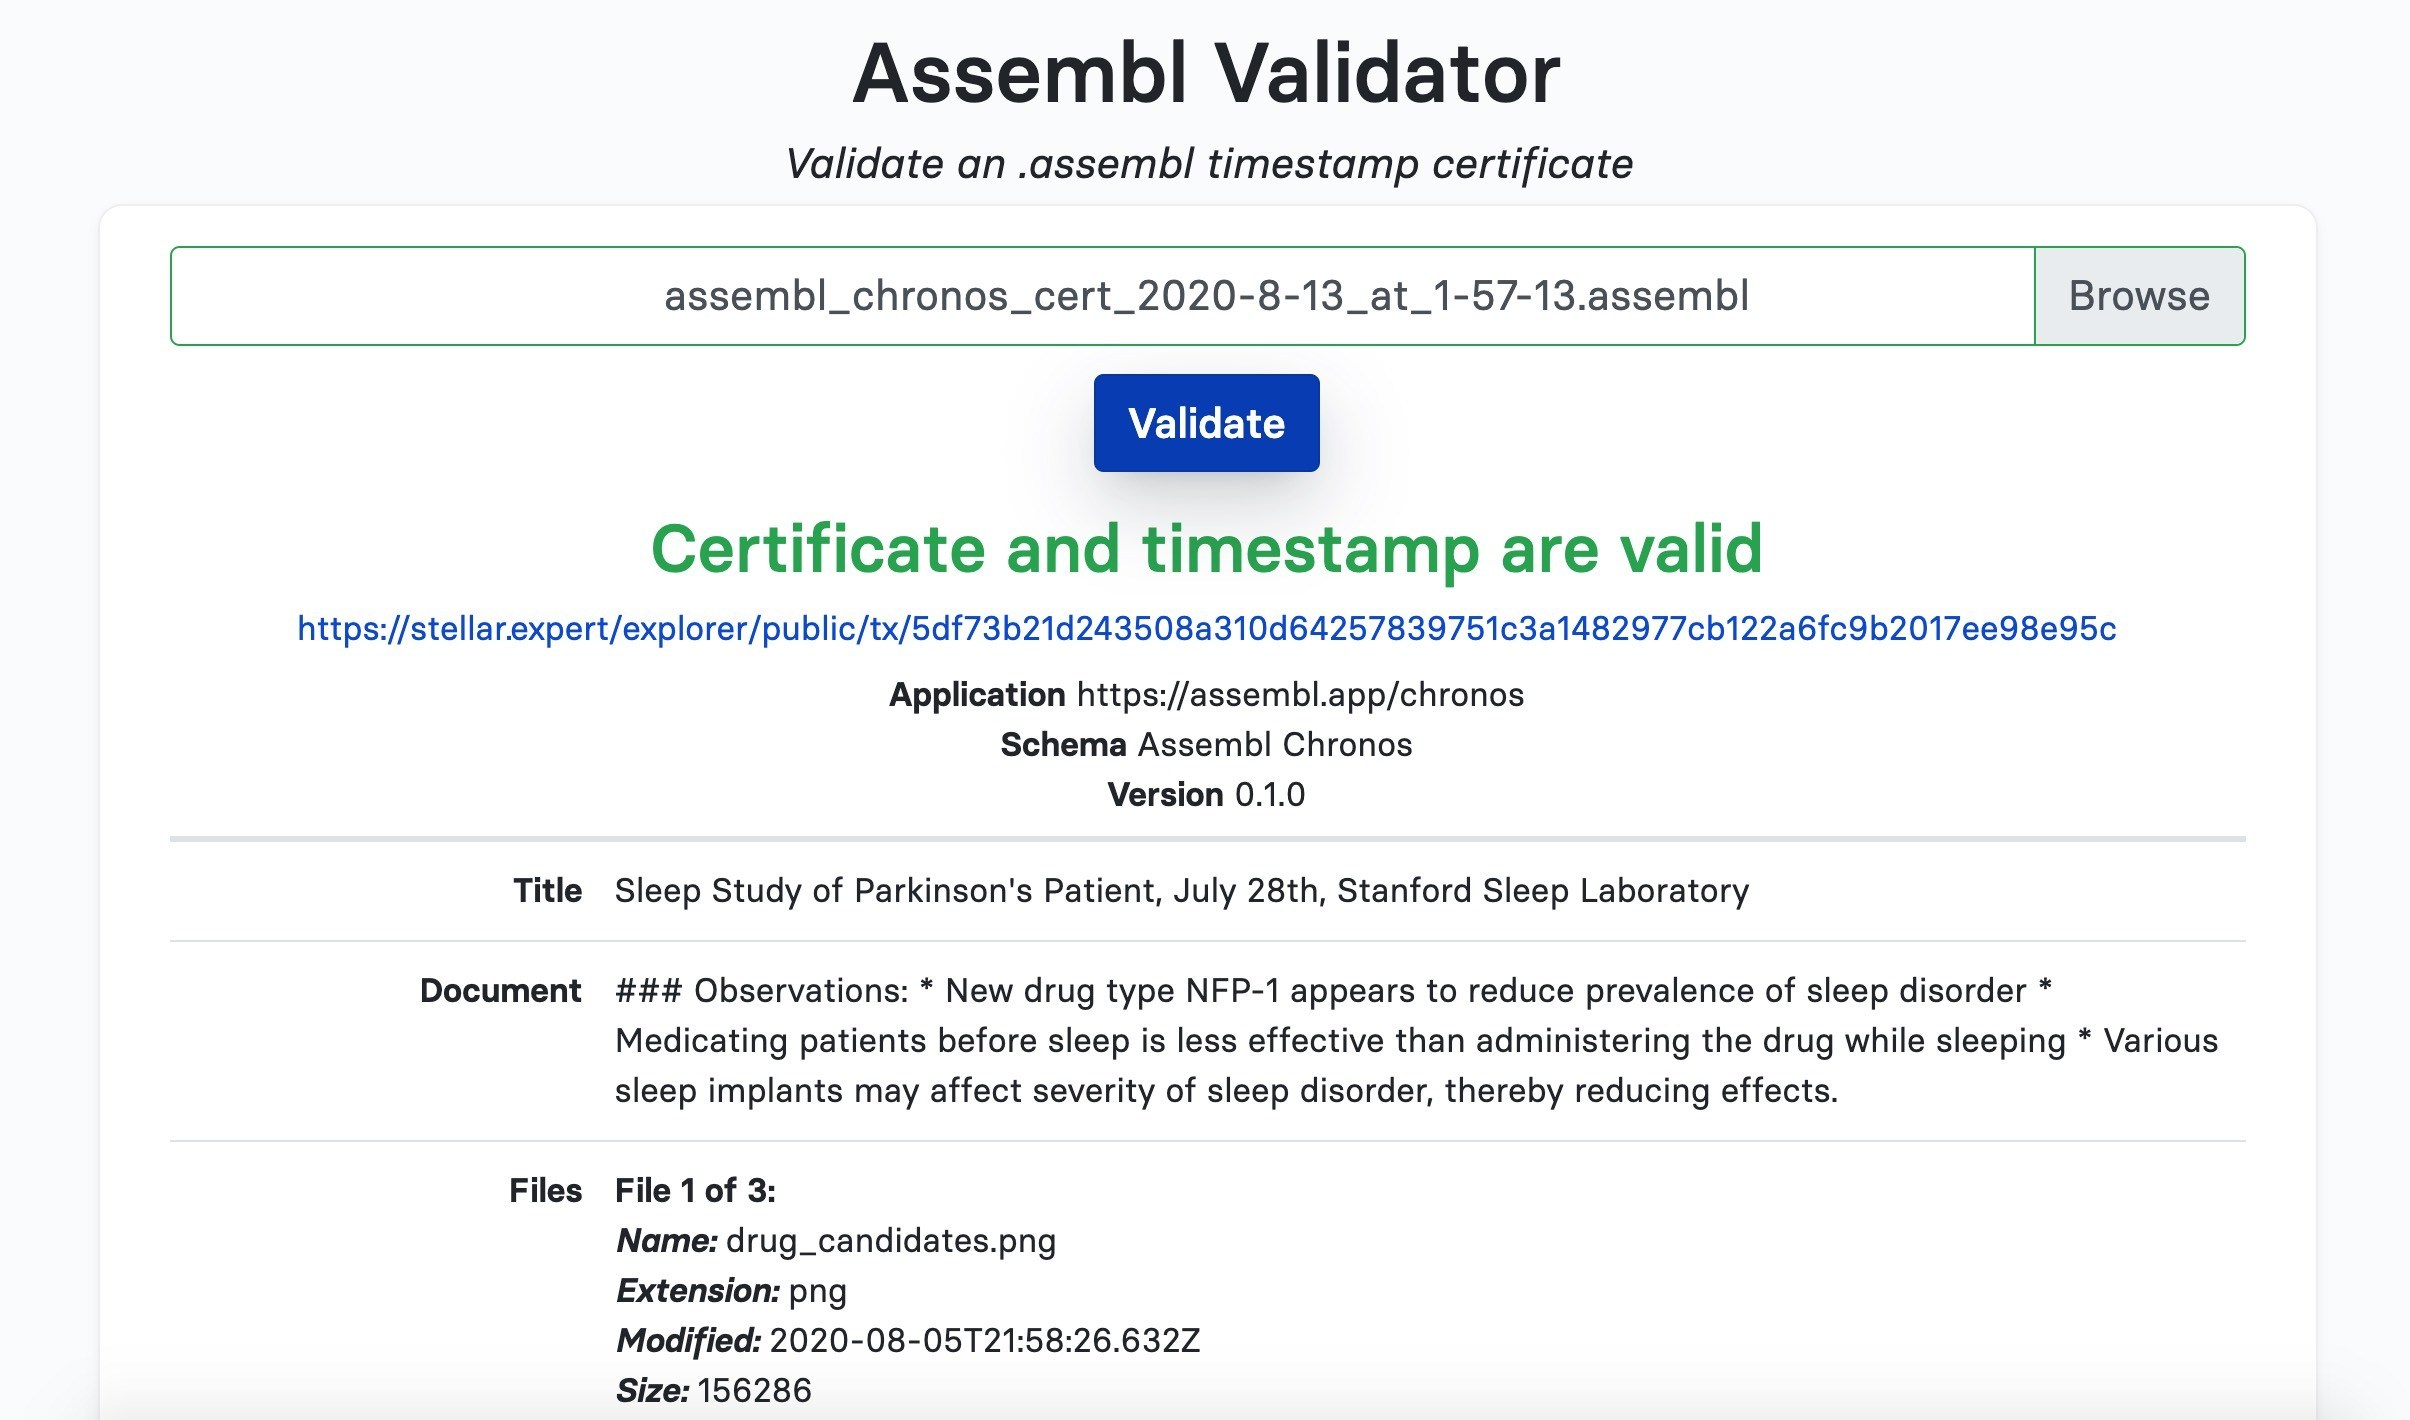 The Assembl Certificate Validator (assembl.app/validator), certifies that an Assembl timestamp is valid, by checking that it matches the blockchain record. Anyone can validate an Assembl Certificate, even without signing up. In this screenshot, a timestamp of sleep study findings minted by a scientist is confirmed to be valid.